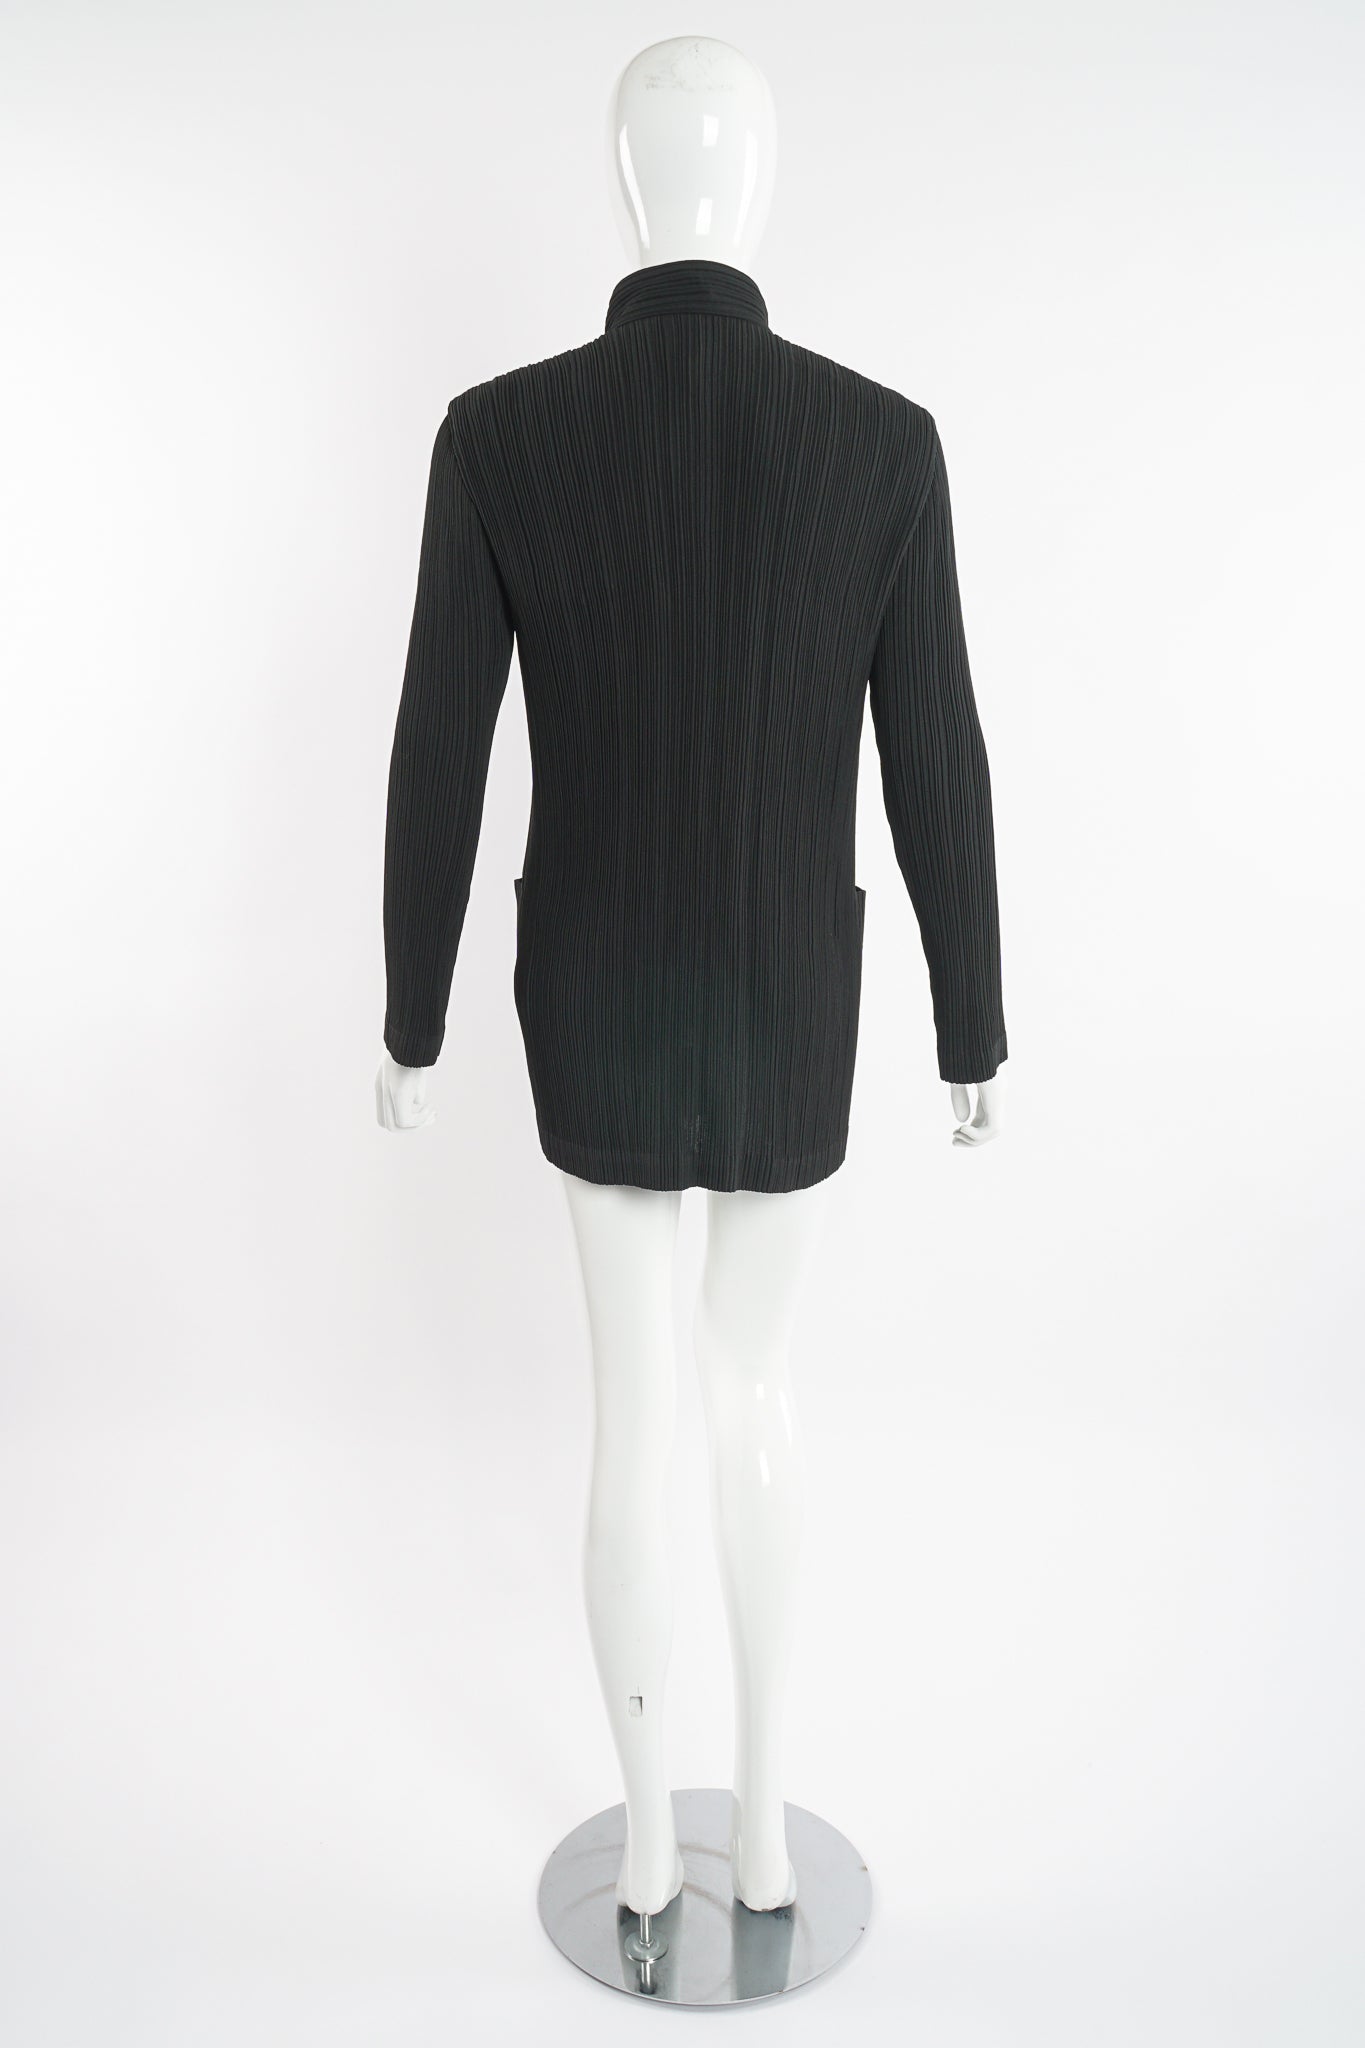 Vintage Issey Miyake Unisex Pleated Shirt Jacket on Mannequin back at Recess Los Angeles